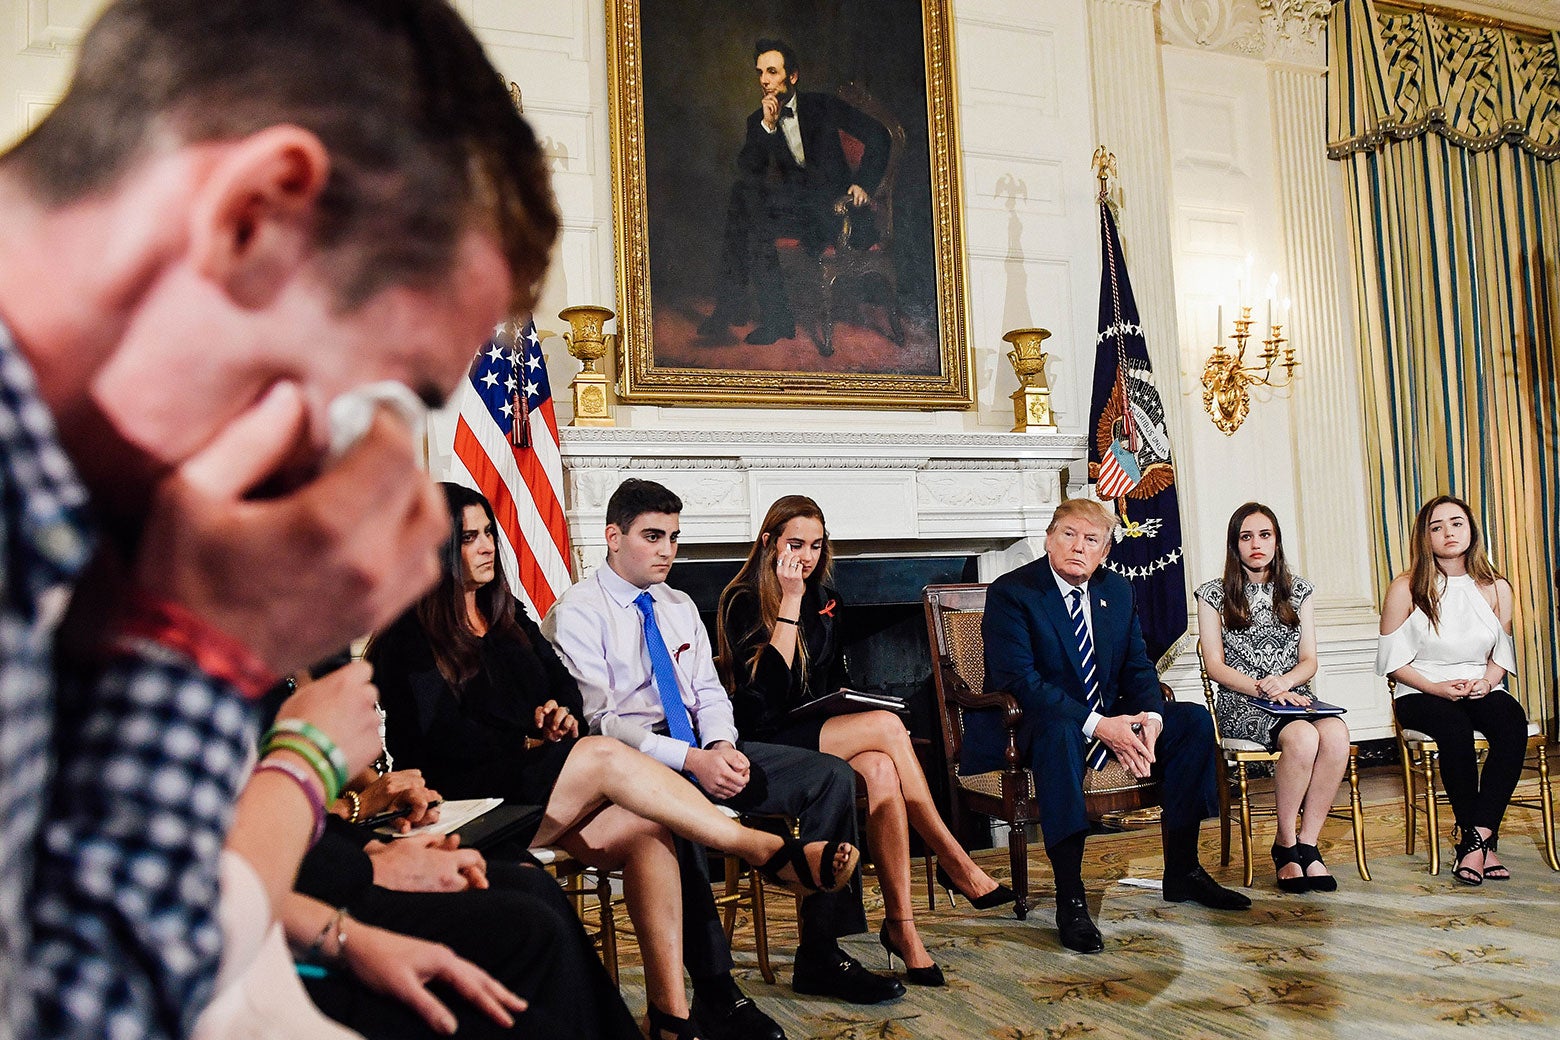 Samuel Zeif, a student at Marjory Stoneman Douglas High School, weeps after recounting his story of the shooting incident at his high school during a listening session with high school students and teachers at the White House on Wednesday in Washington.